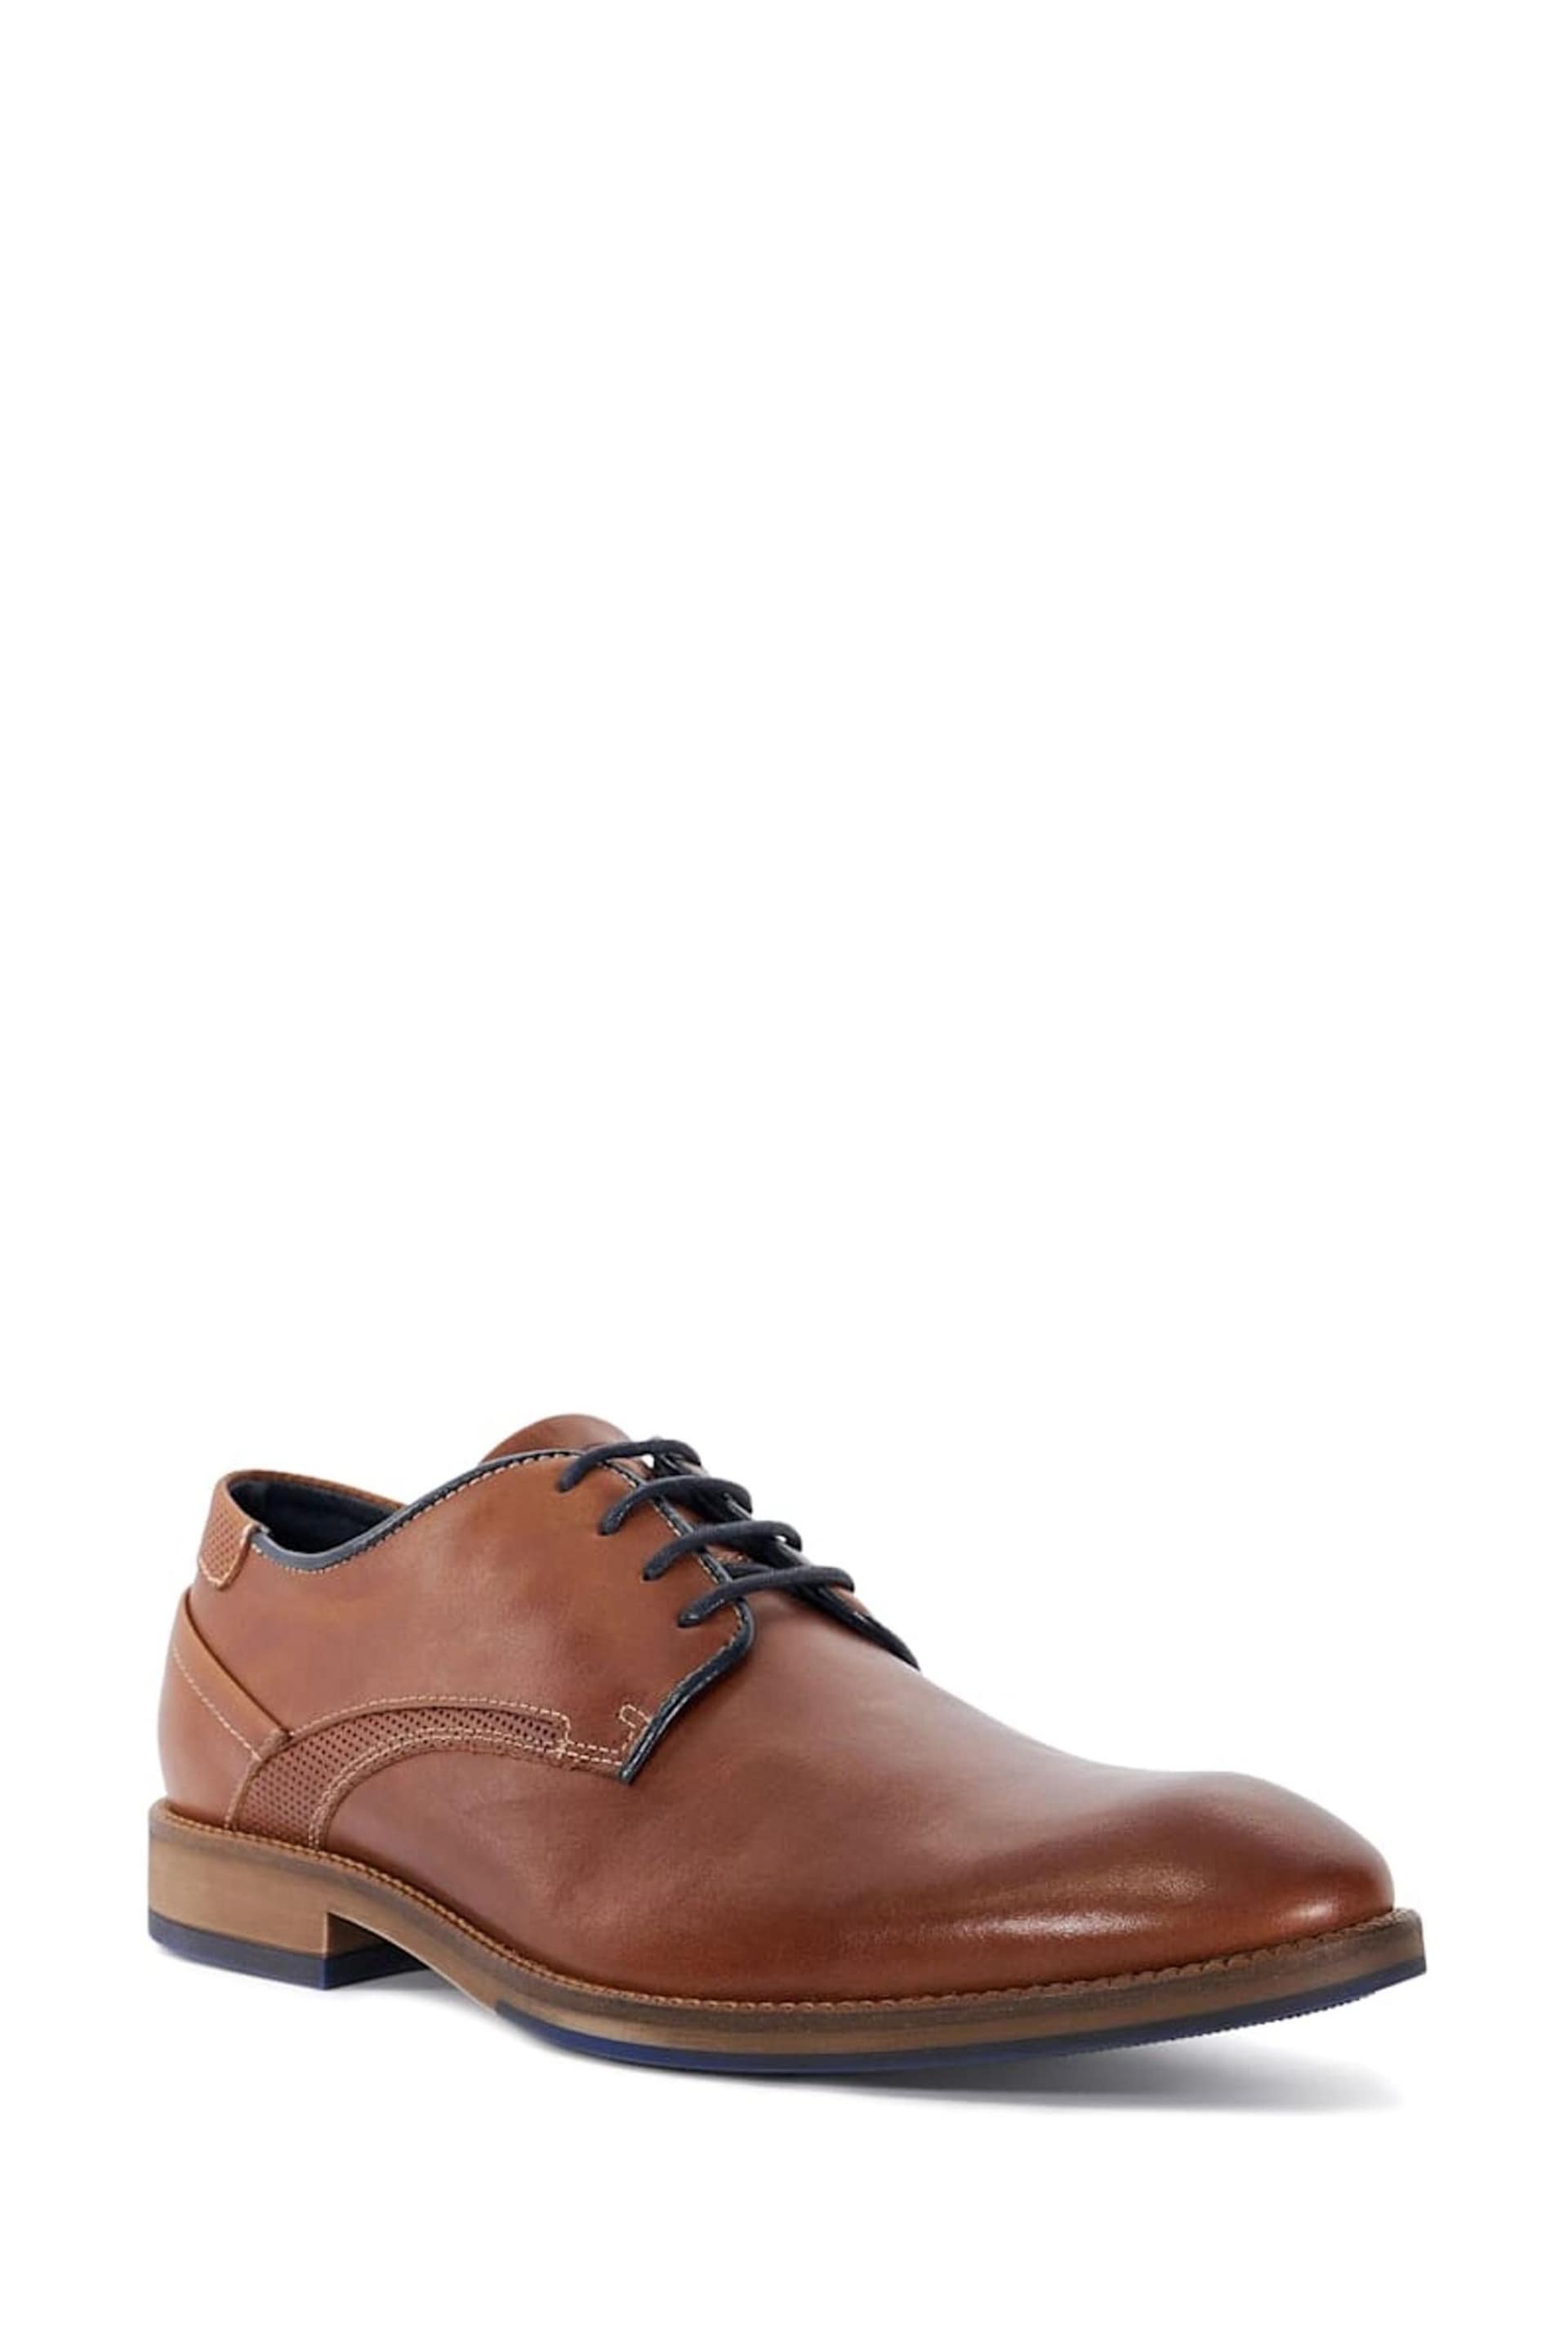 Dune London Brown Bridon Piped Gibson Casual Shoes - Image 2 of 5